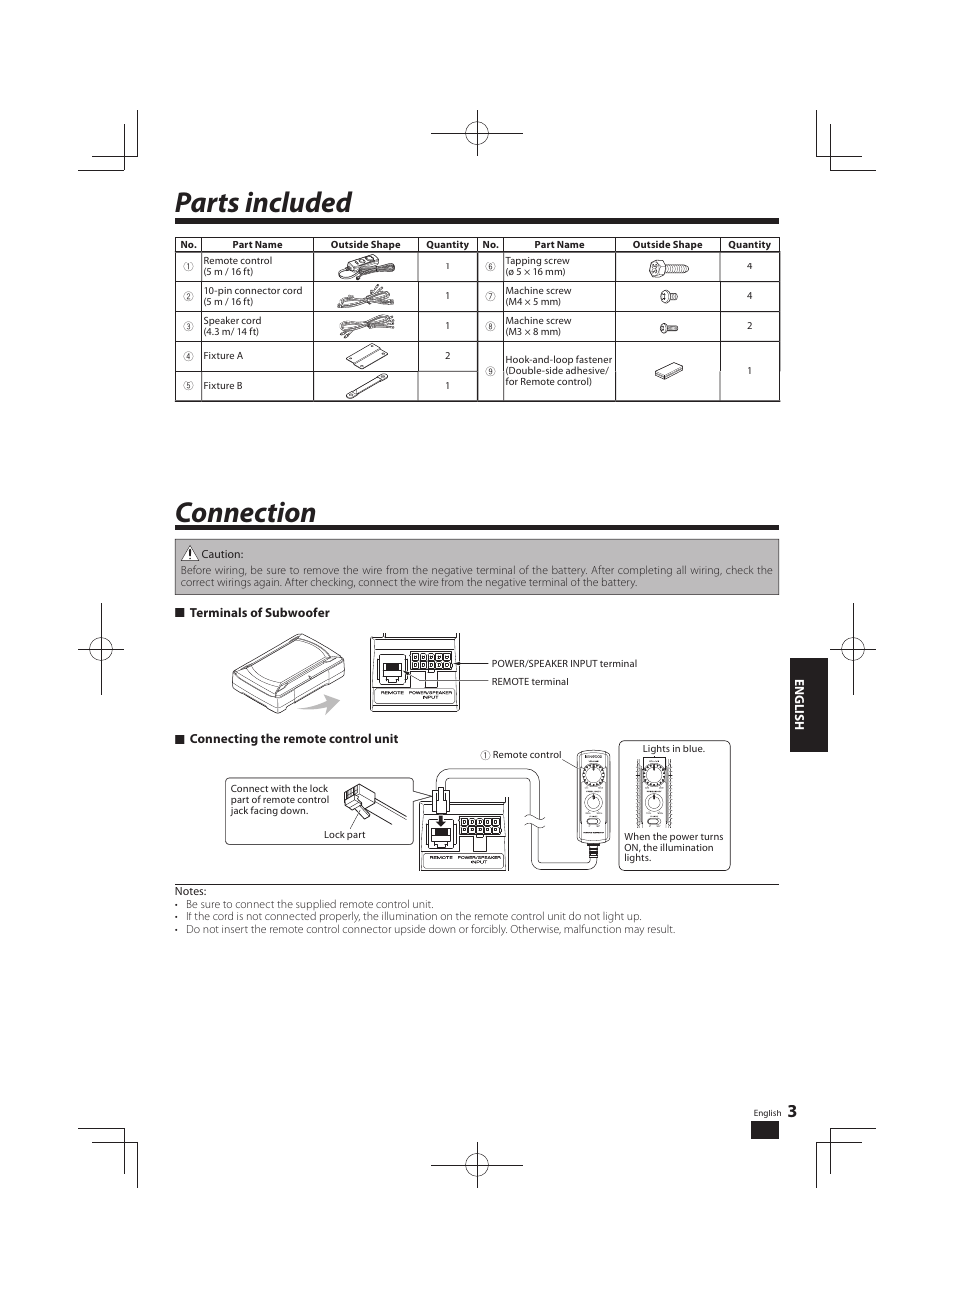 Parts included, Connection | Kenwood KSC-SW11 User Manual | Page 3 / 9 |  Original mode